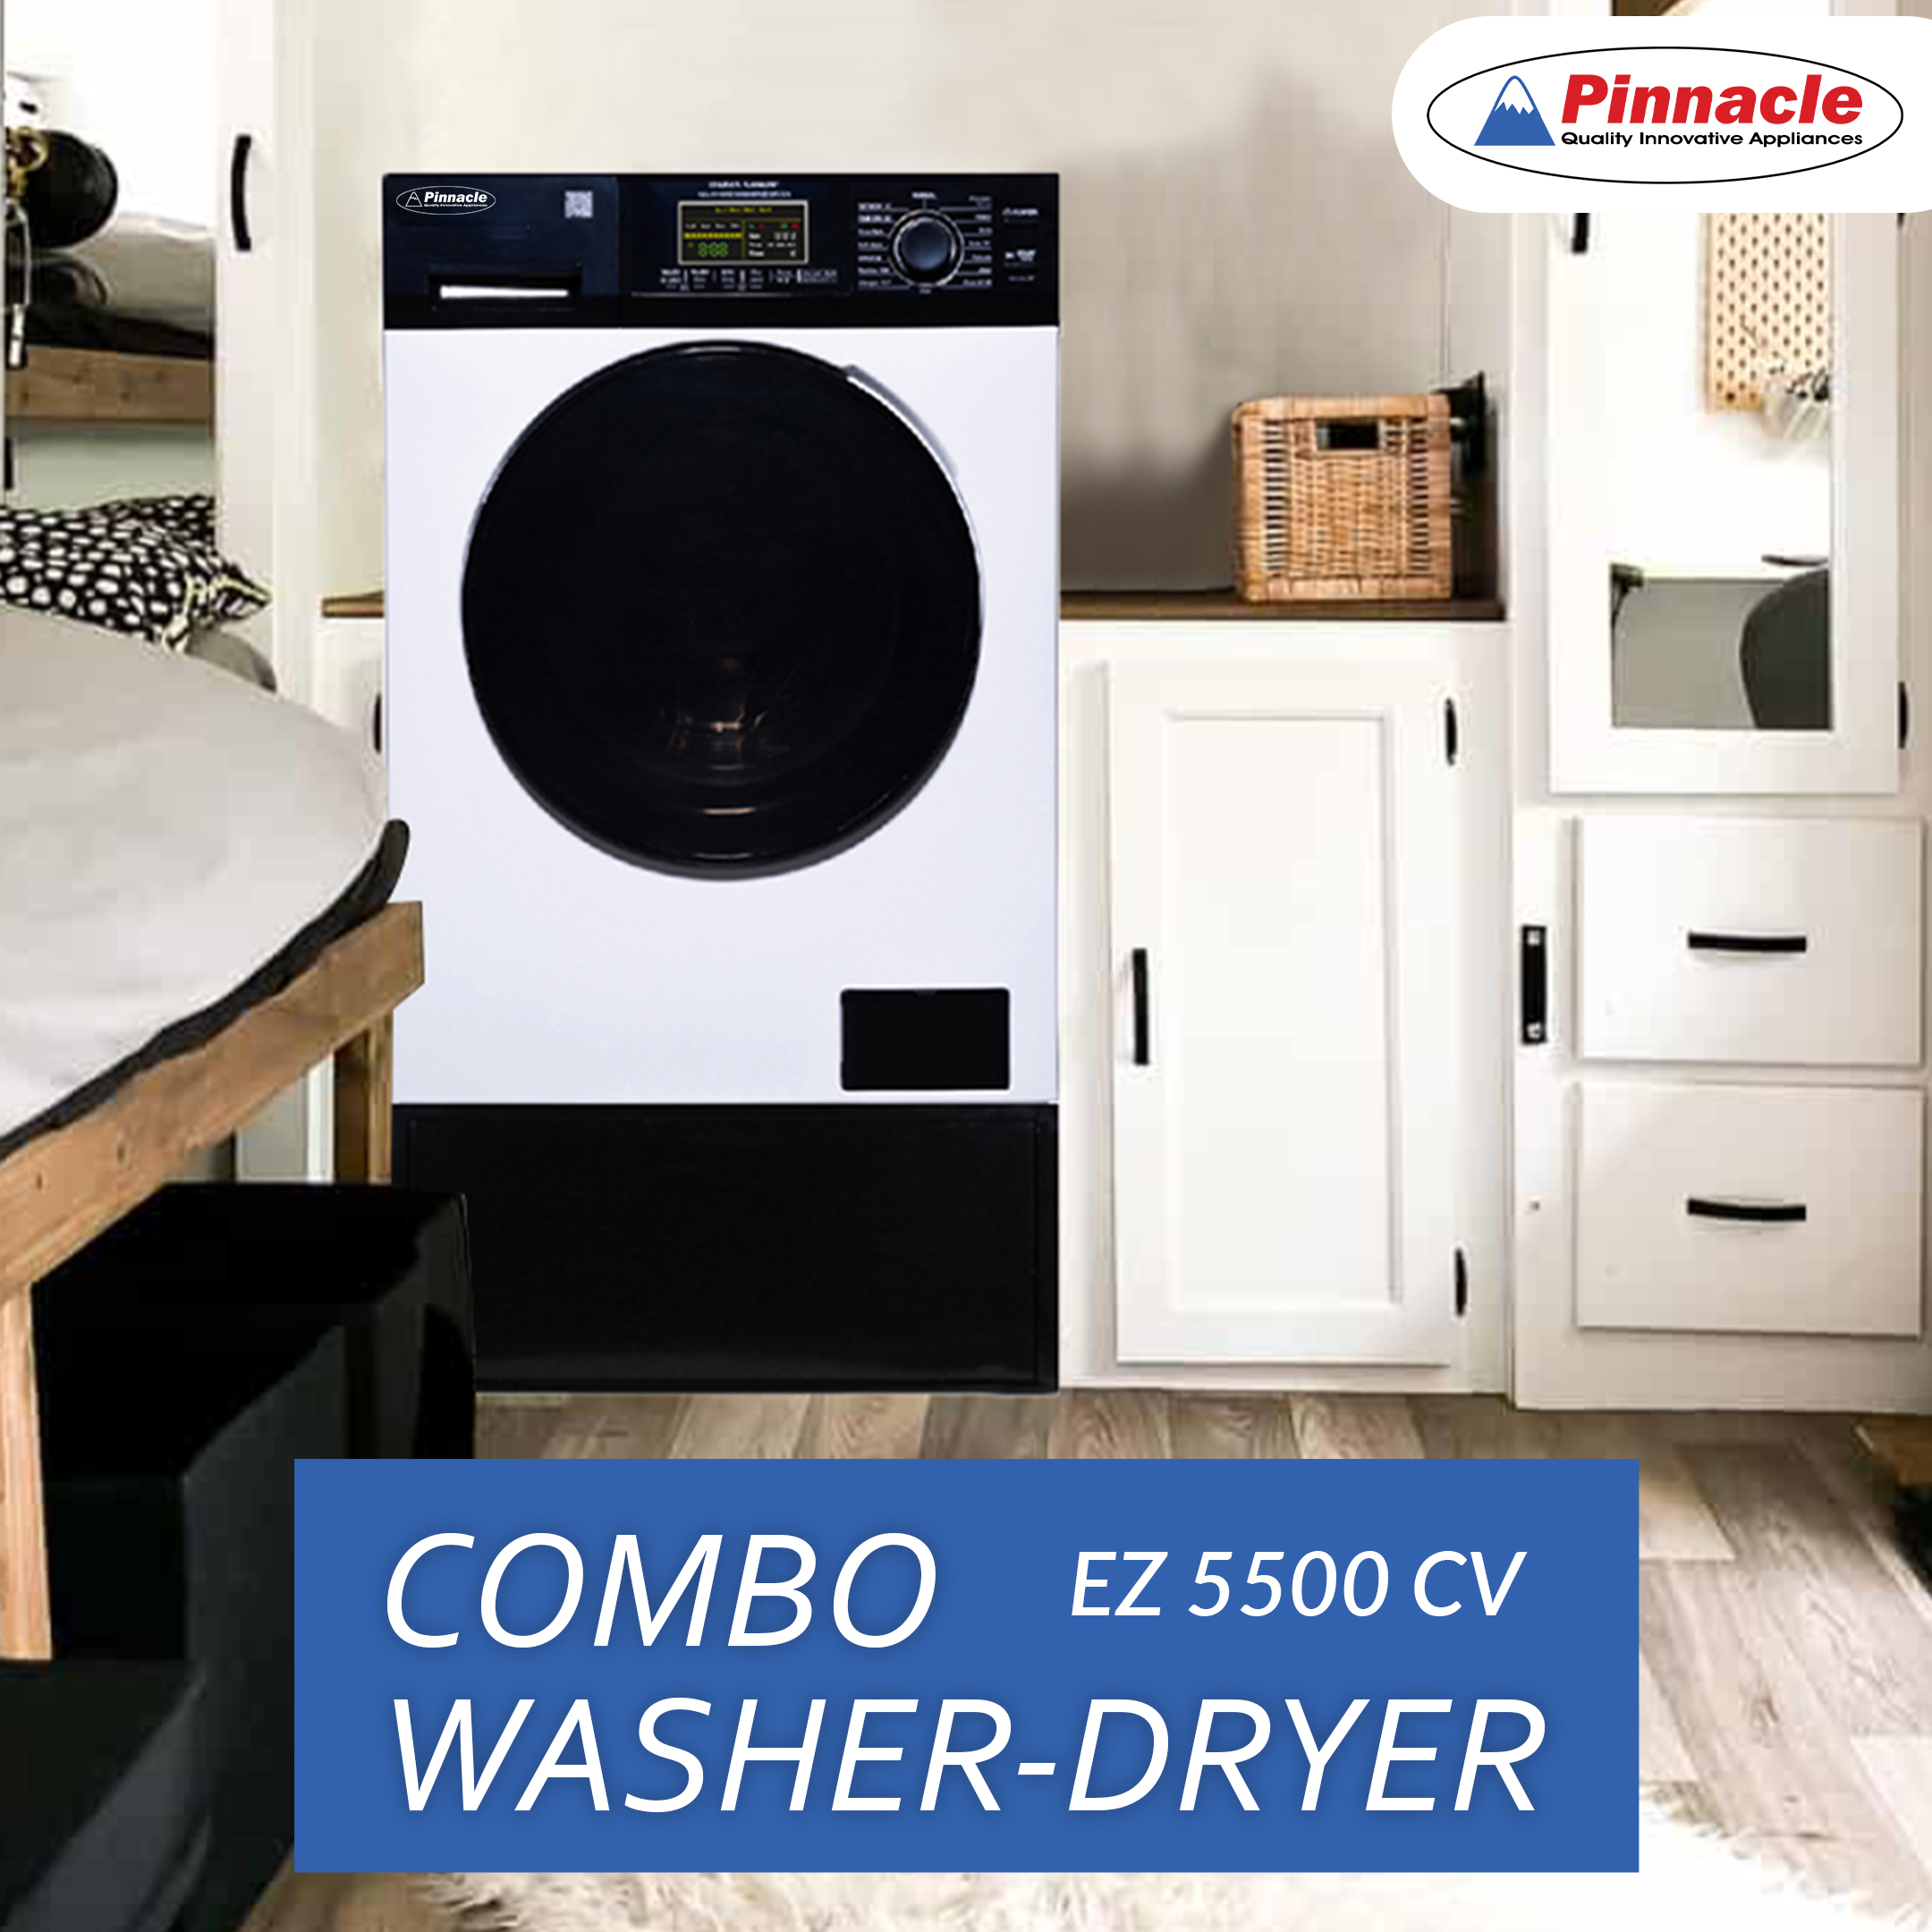 Pinnacle Combos Unveils Its New Super Combo Washer Dryer XL +  Laundry Pedestal with Drawer Bundle